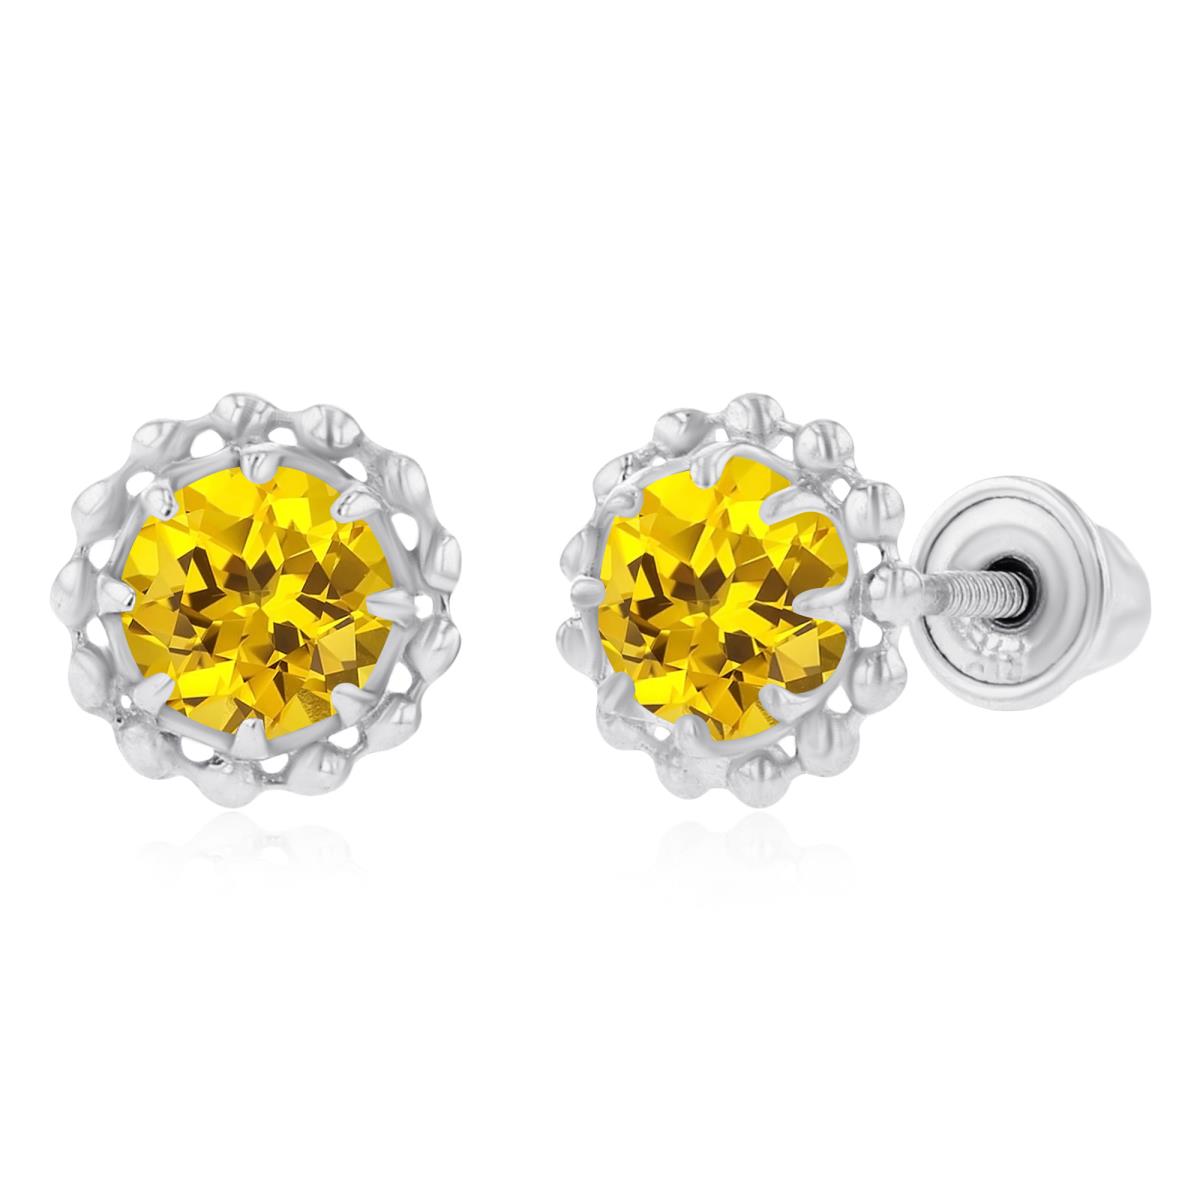 14K White Gold 4mm Round Created Yellow Sapphire Textured Halo Screwback Earrings